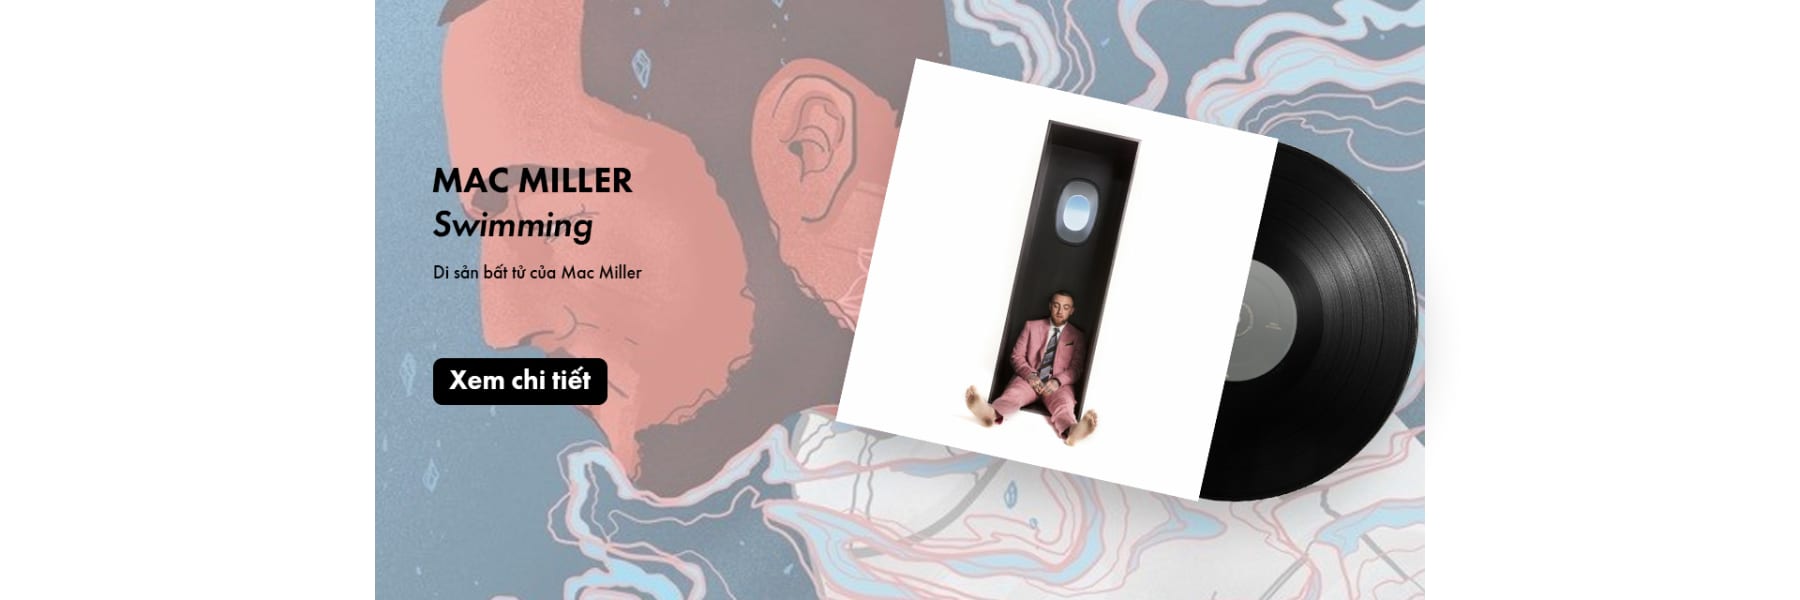 https://vocrecords.vn/product/on-the-run/sale-off-on-the-run/mac-miller-swimming/